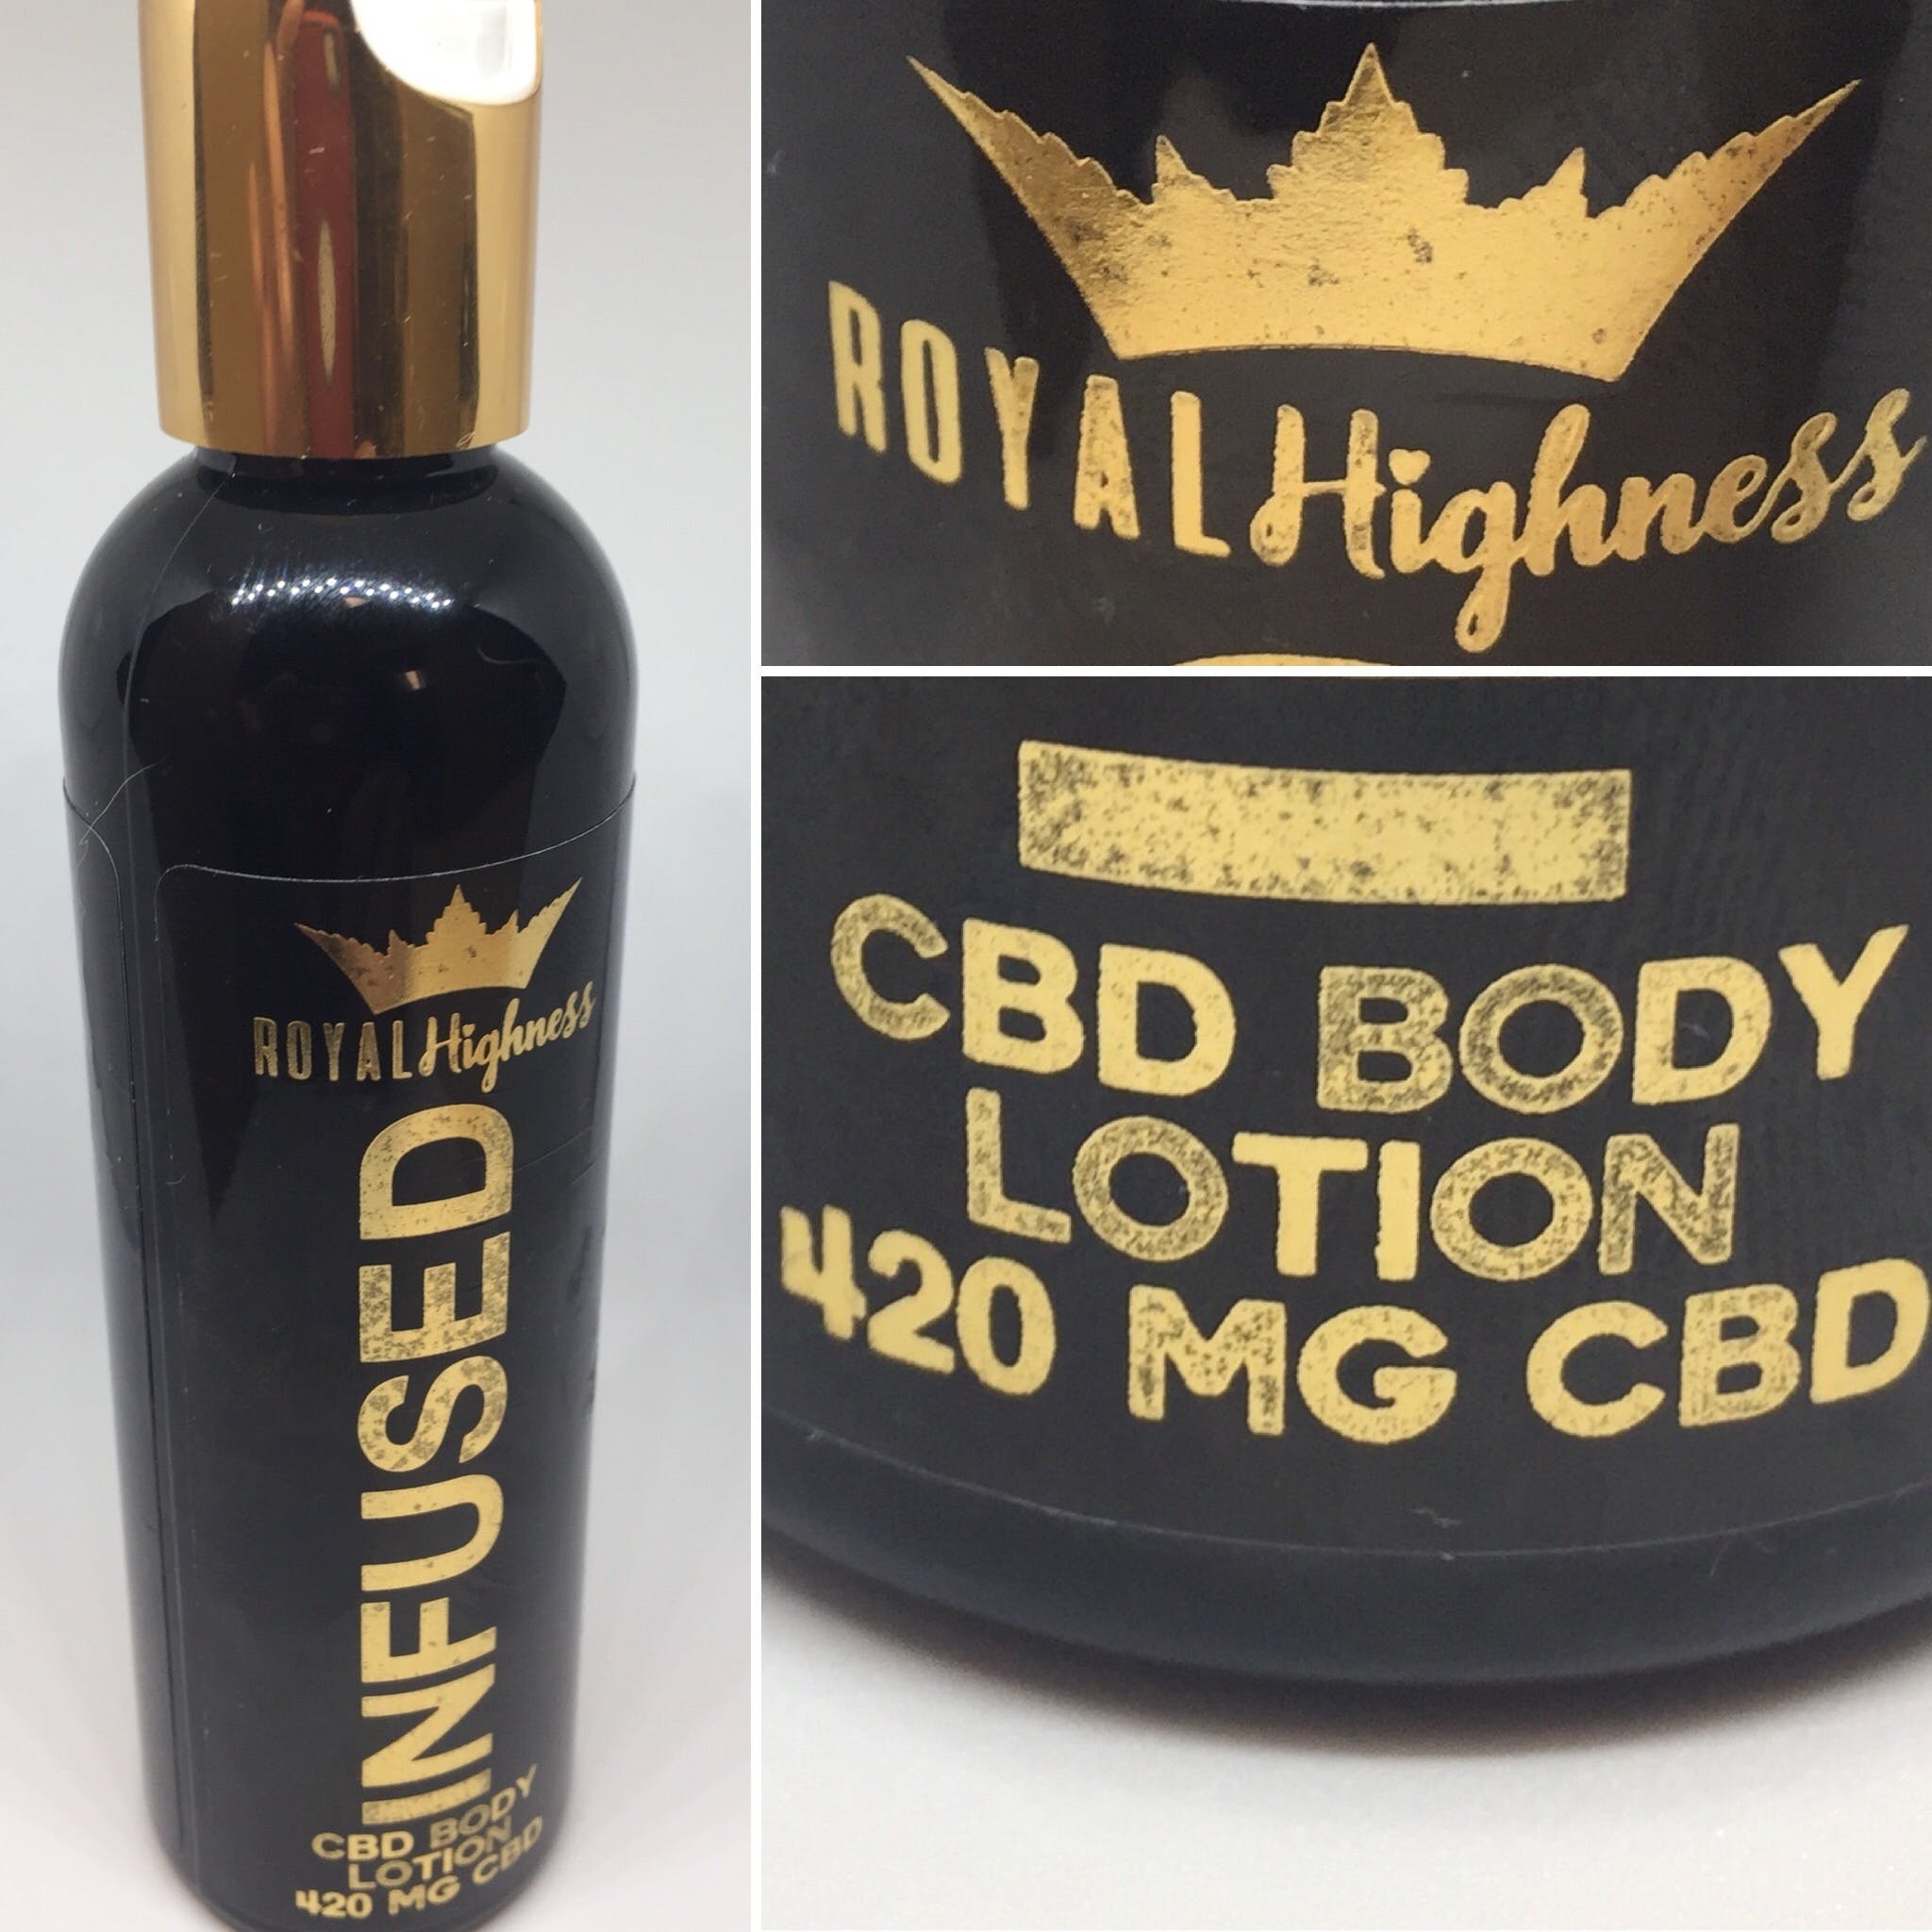 topicals-infused-cbd-body-pain-lotion-royal-highness-420mg